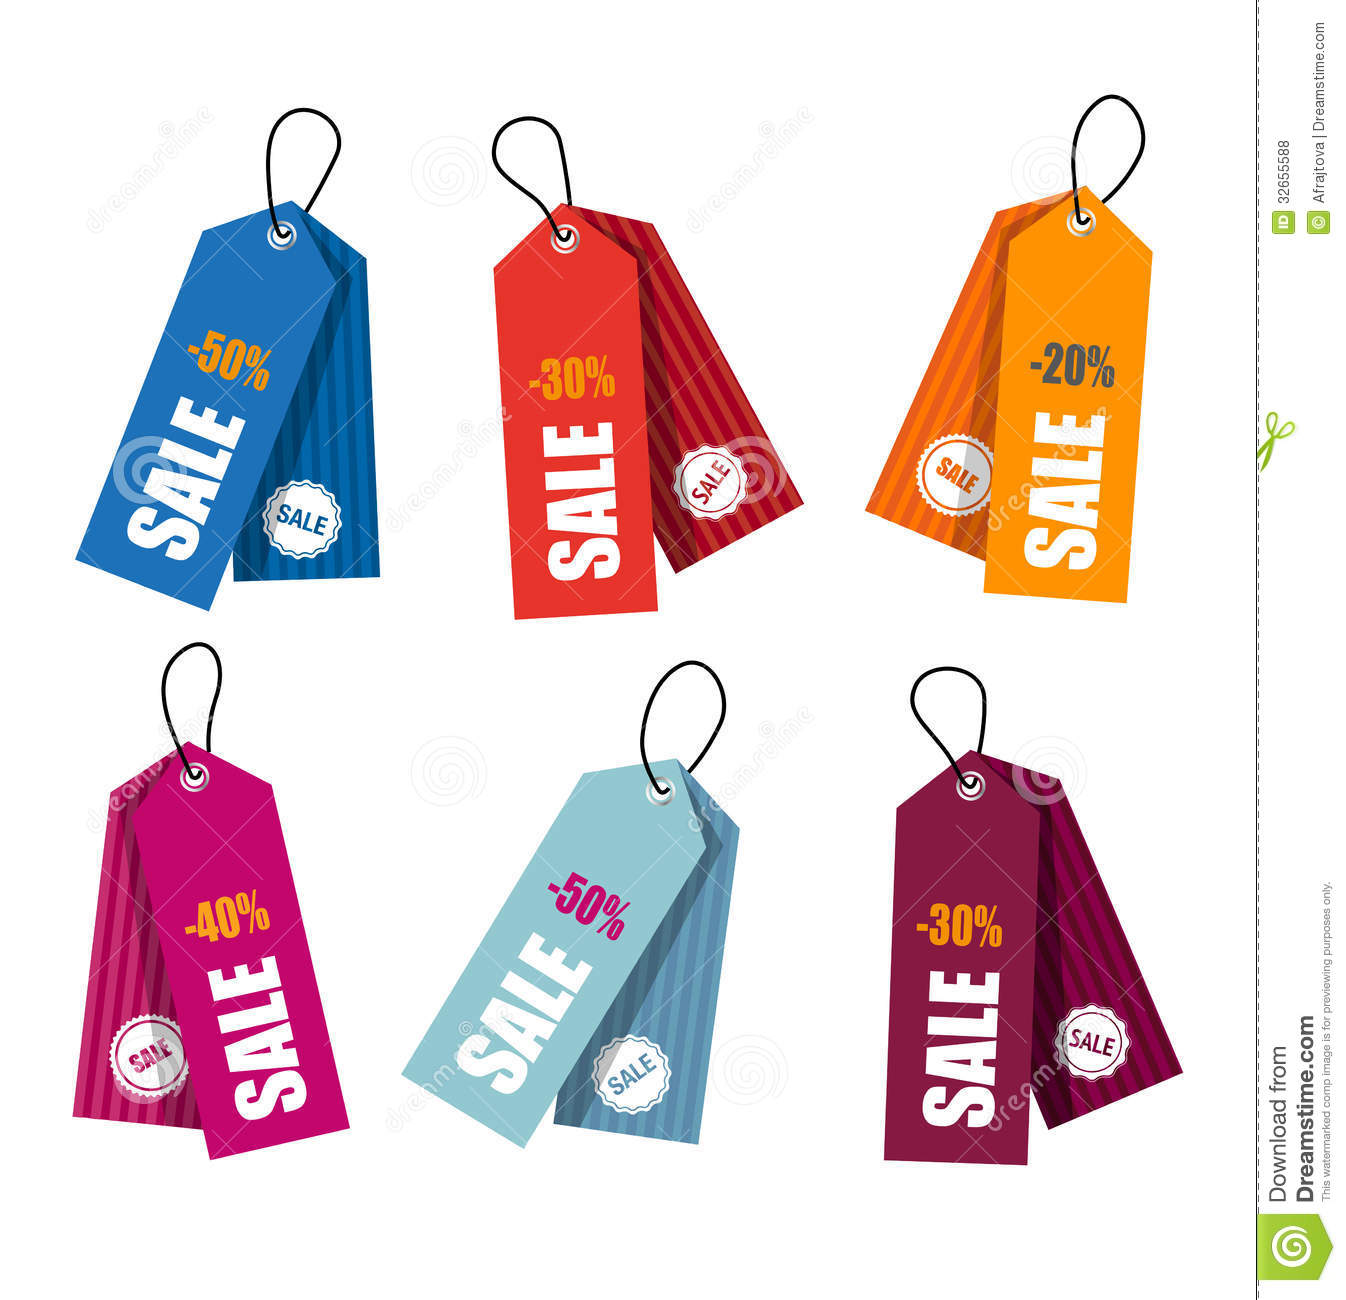 custom price tags for clothes